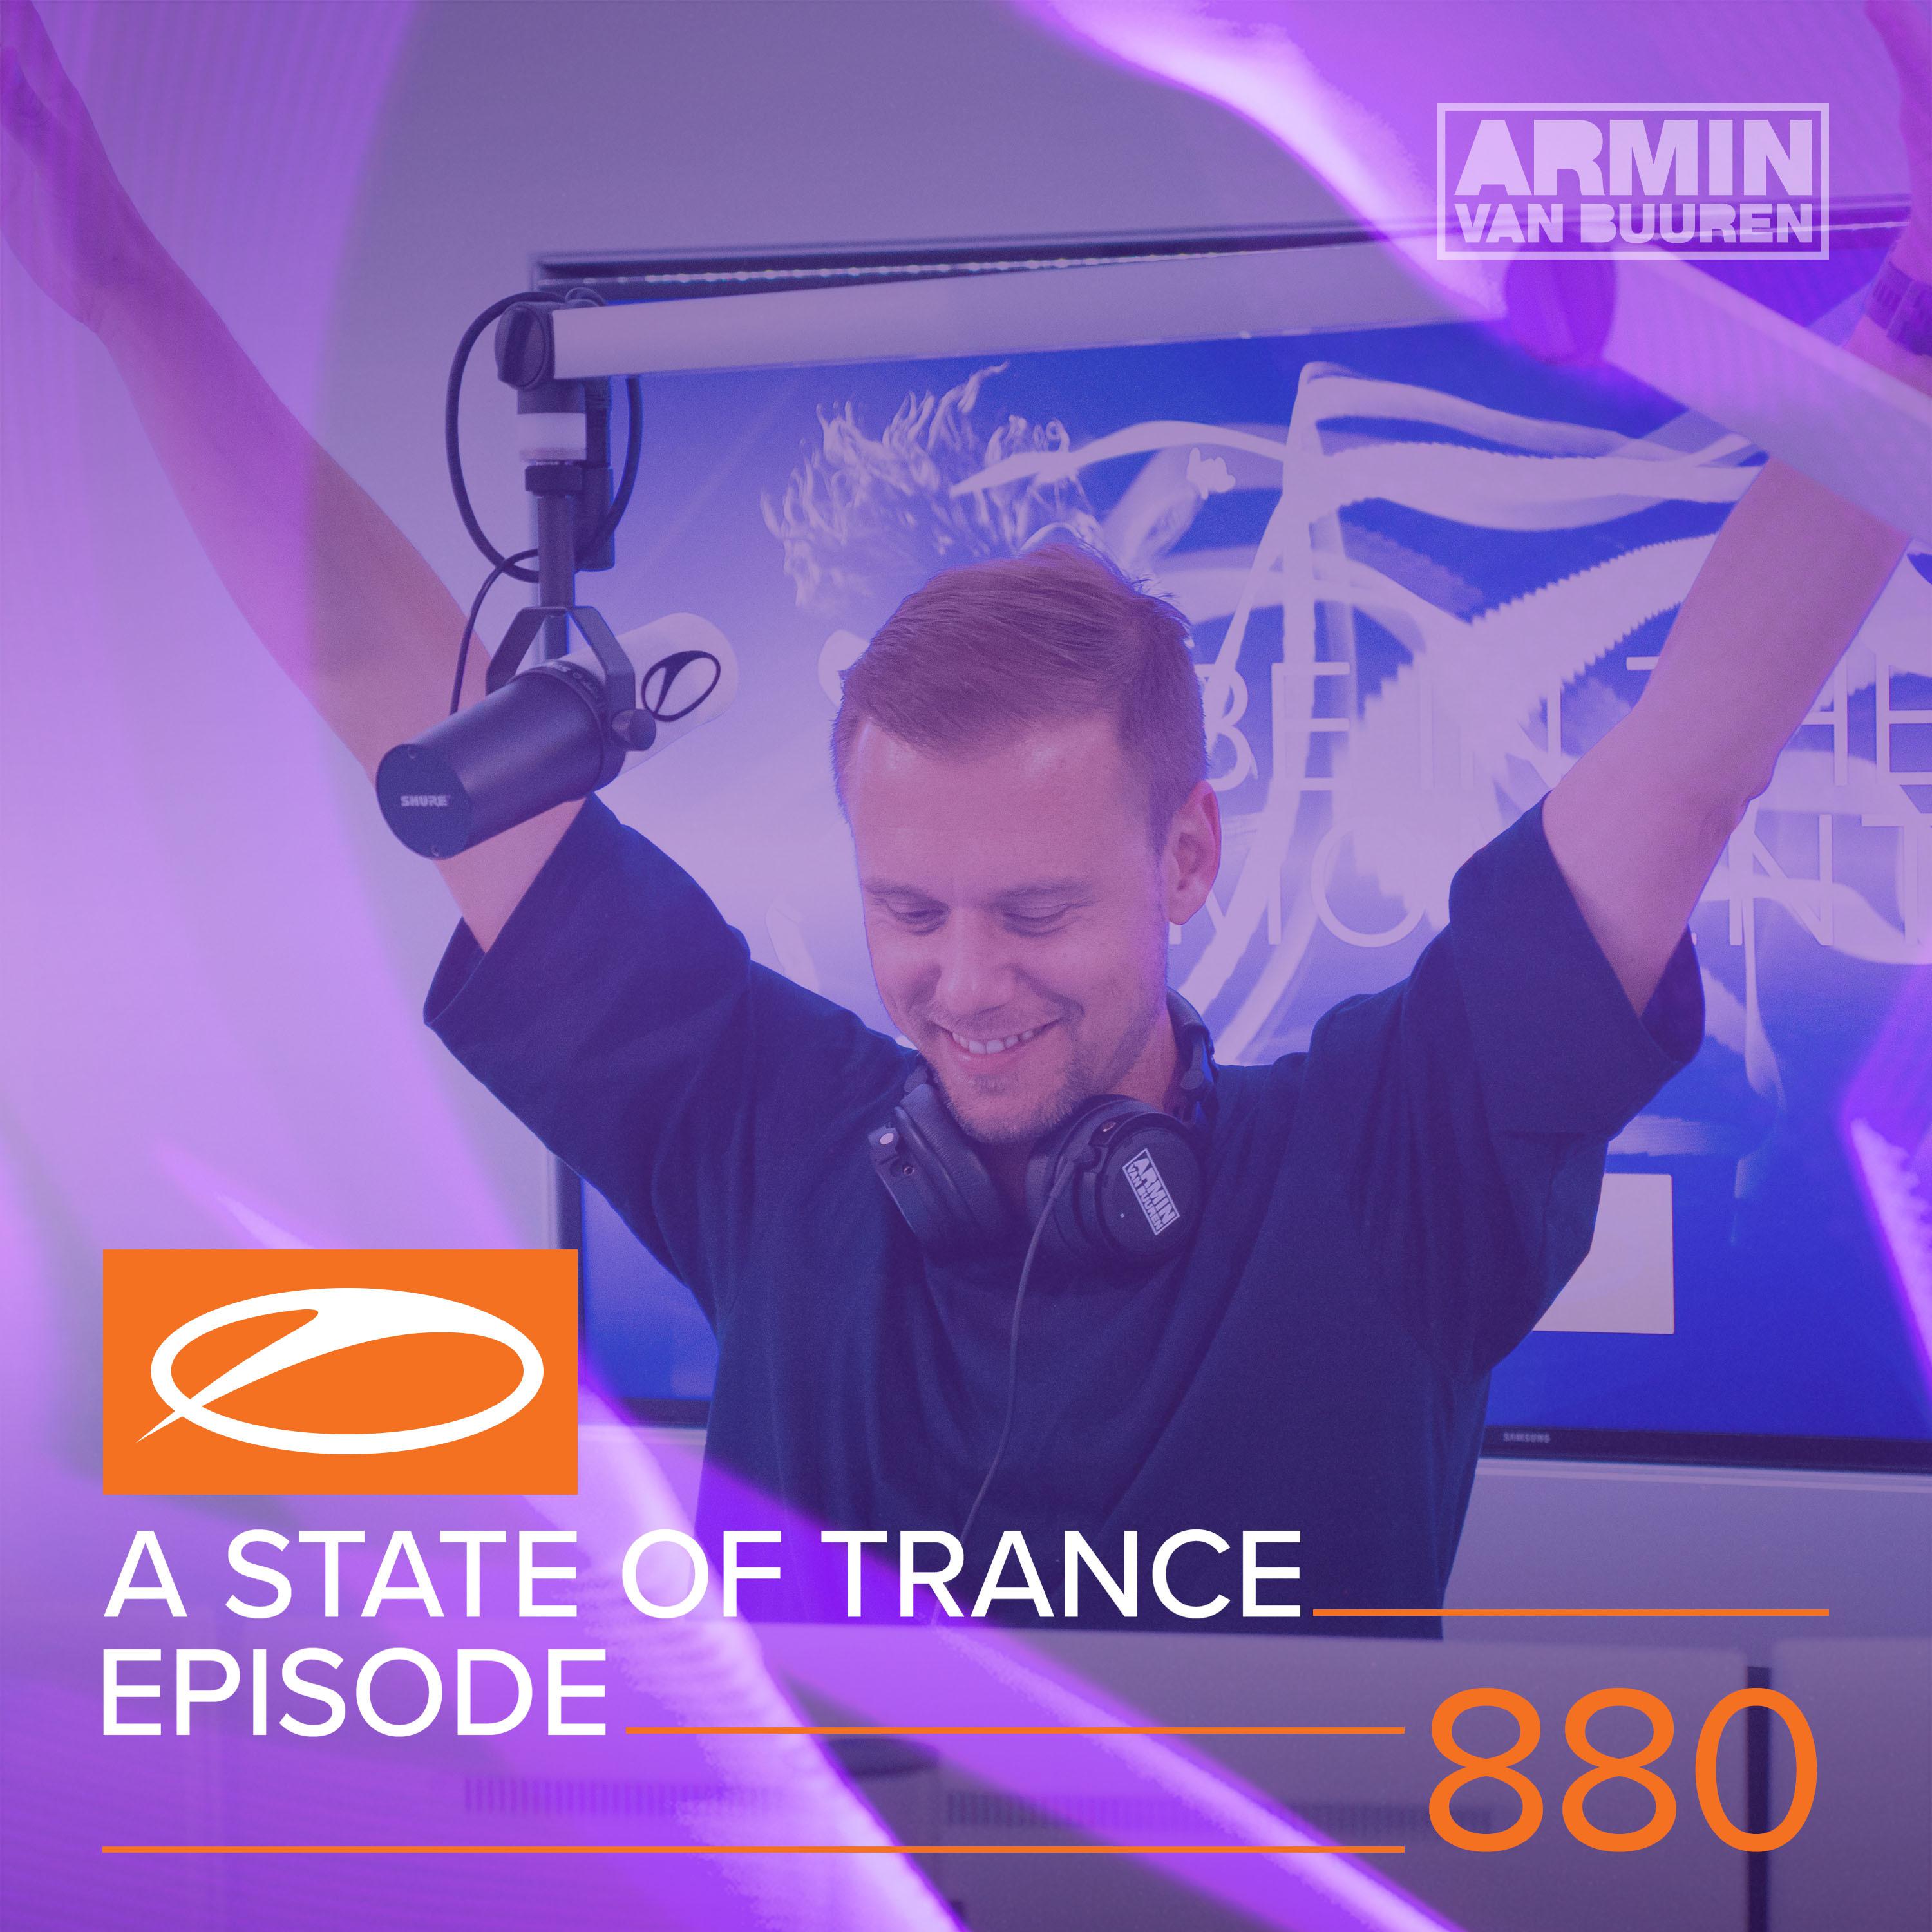 Call To Arms (ASOT 880) (Cosmic Gate Remix)